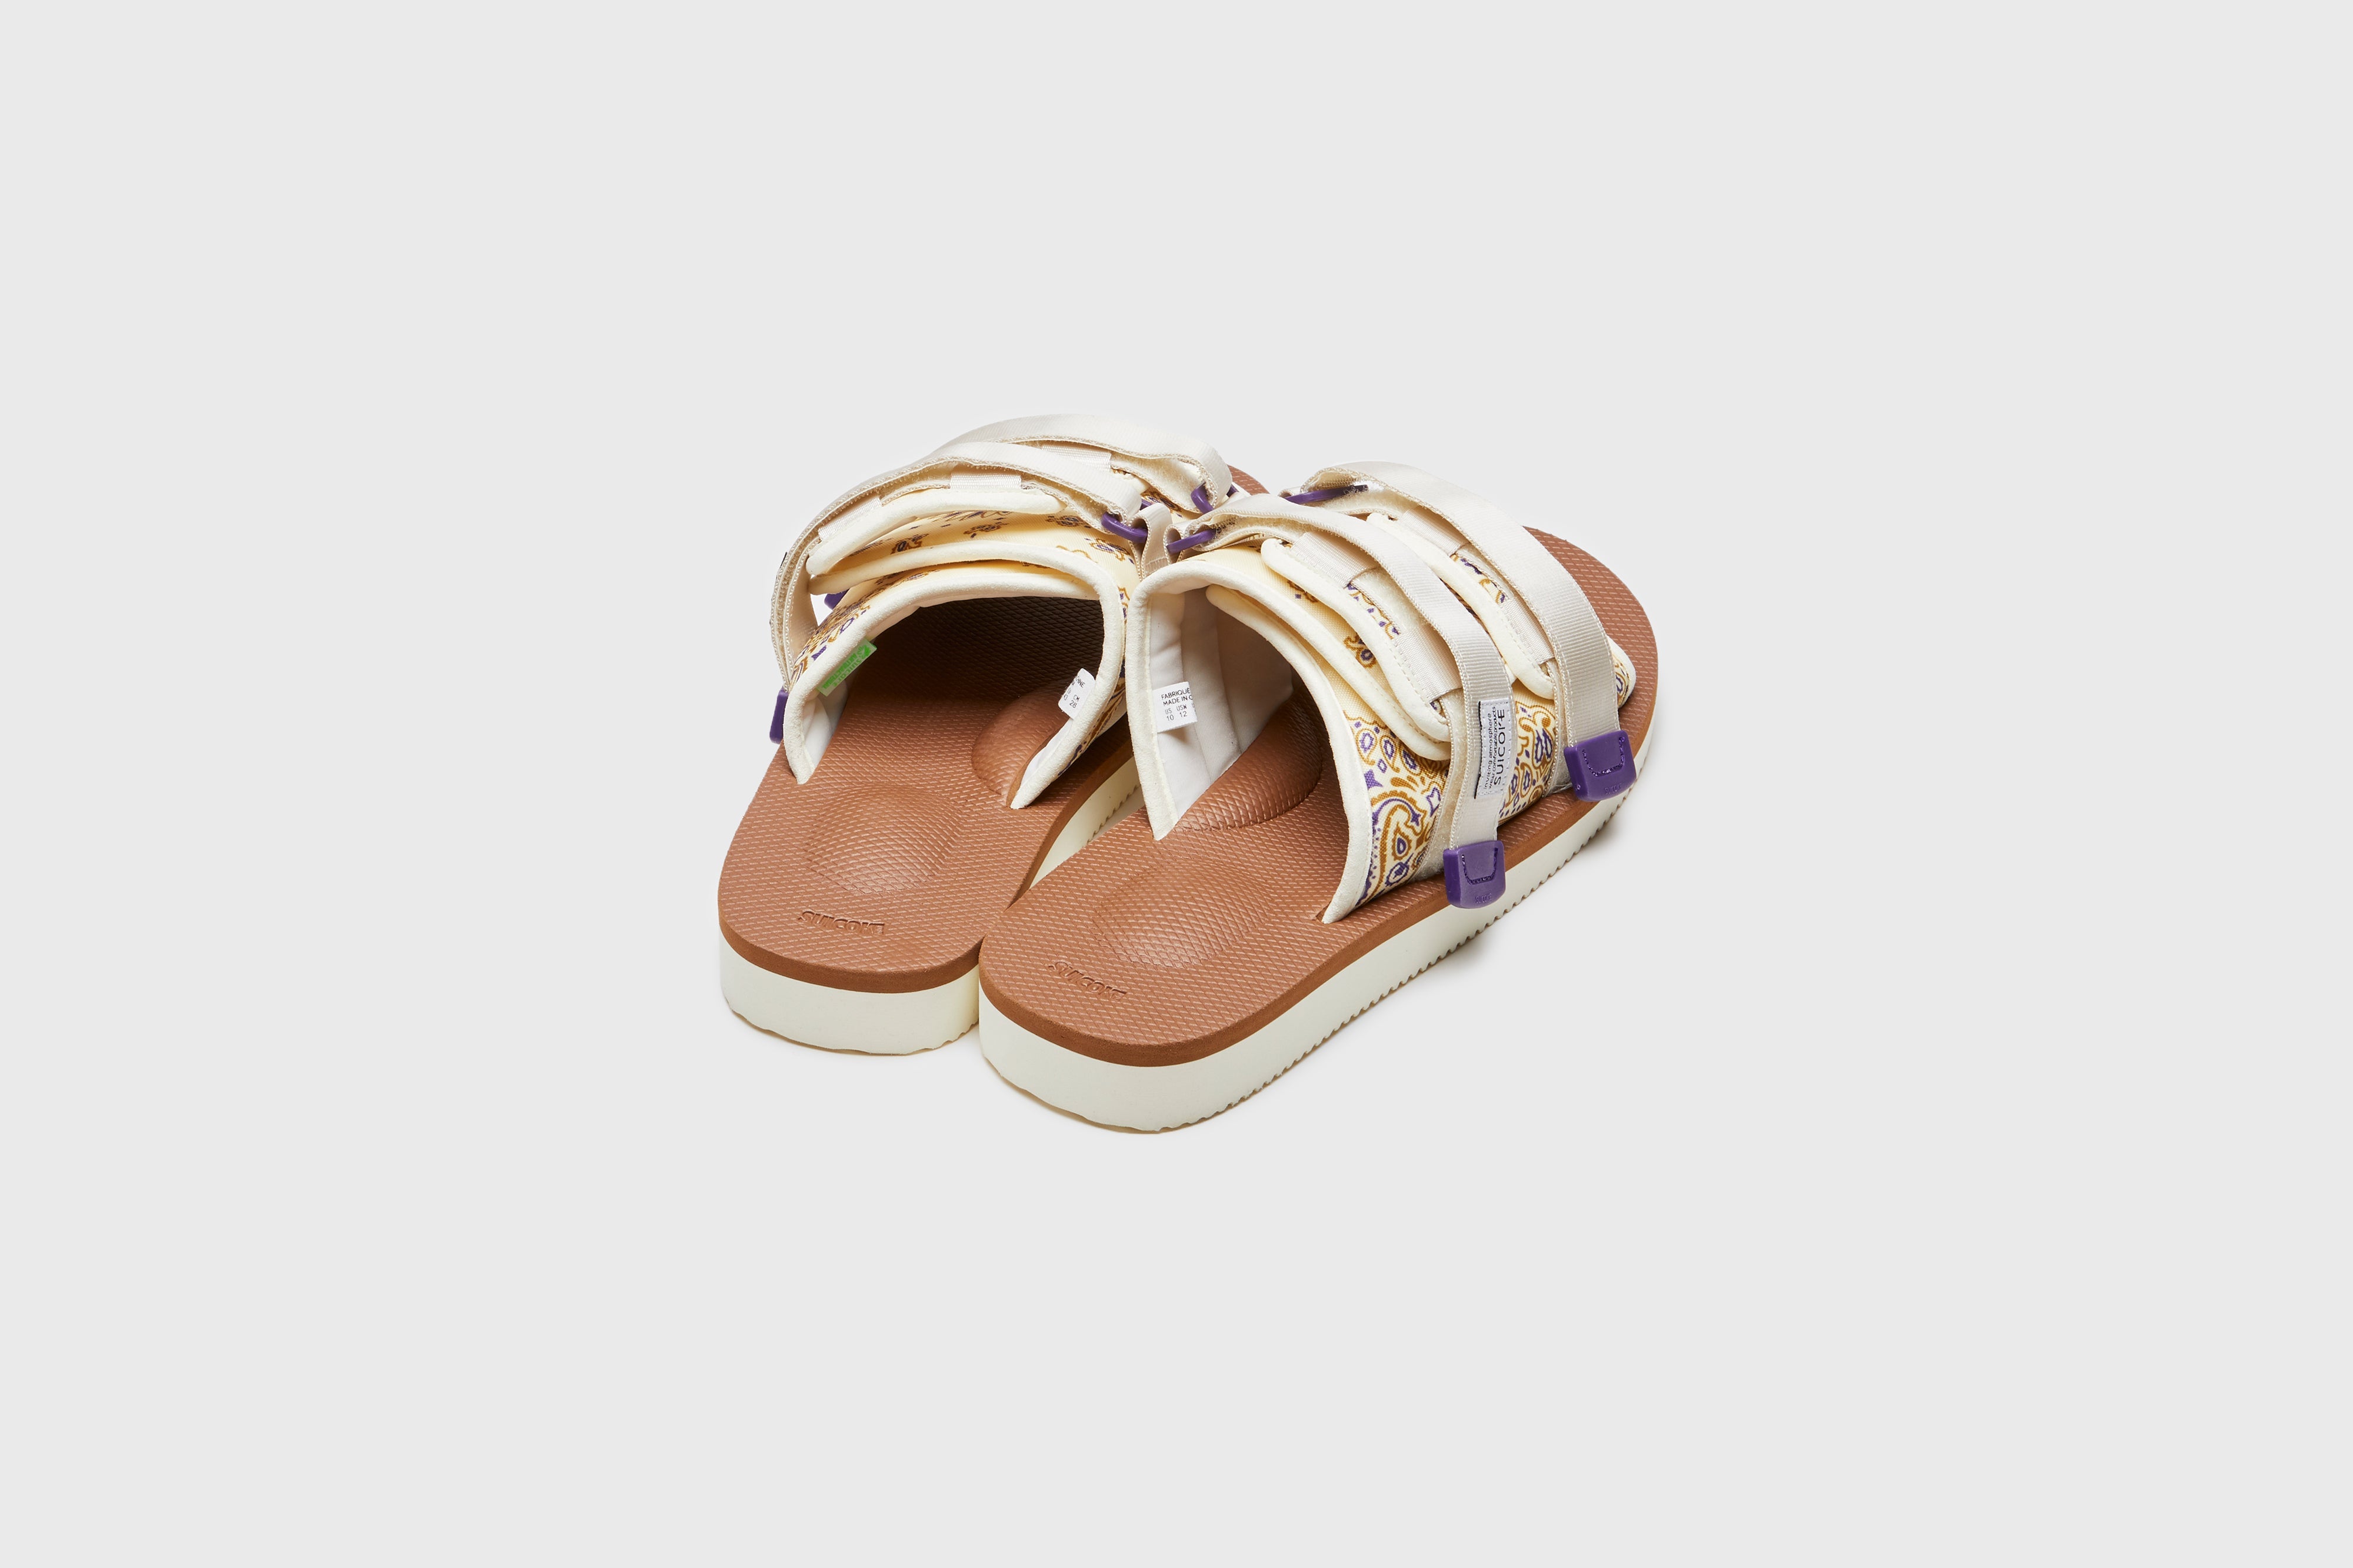 SUICOKE MOTO-Cab-PT05 sandals with ivory & brown nylon upper, ivory & brown midsole and sole, strap and logo patch. From Spring/Summer 2023 collection on eightywingold Web Store, an official partner of SUICOKE. OG-056CAB-PT05 IVORY X BROWN